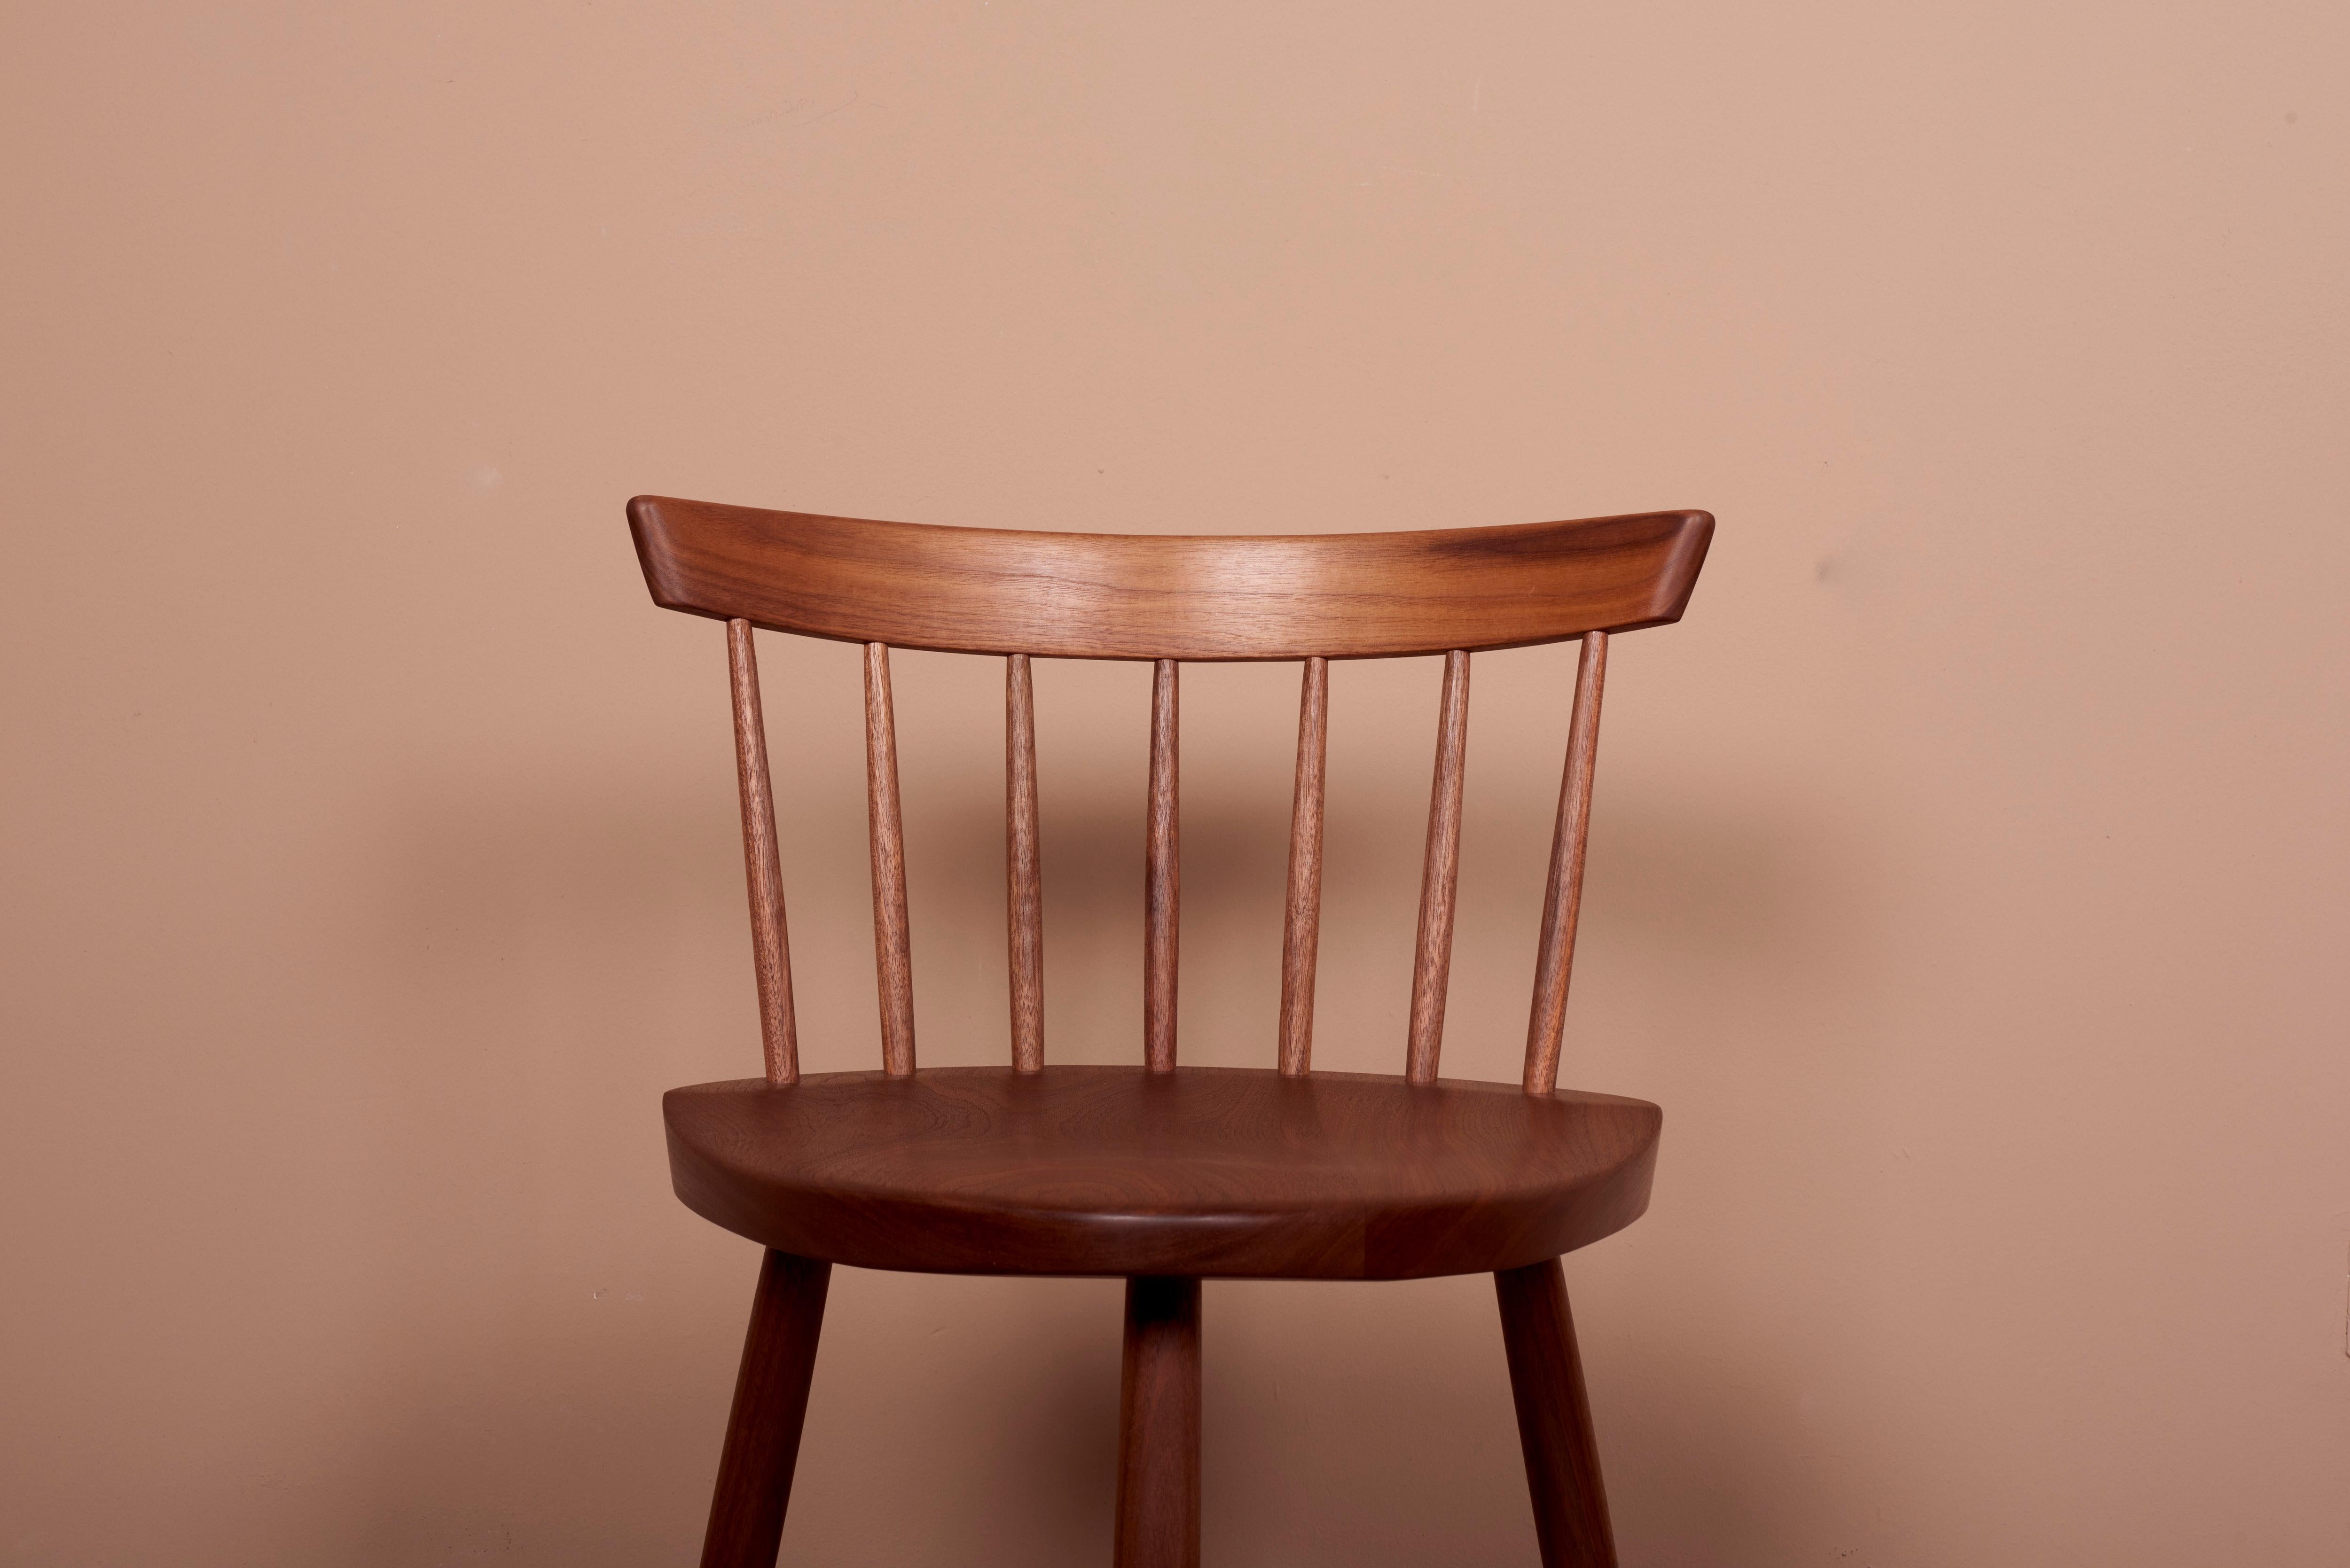 Wood Pair of Mira Chairs by Mira Nakashima based on a design by George Nakashima For Sale